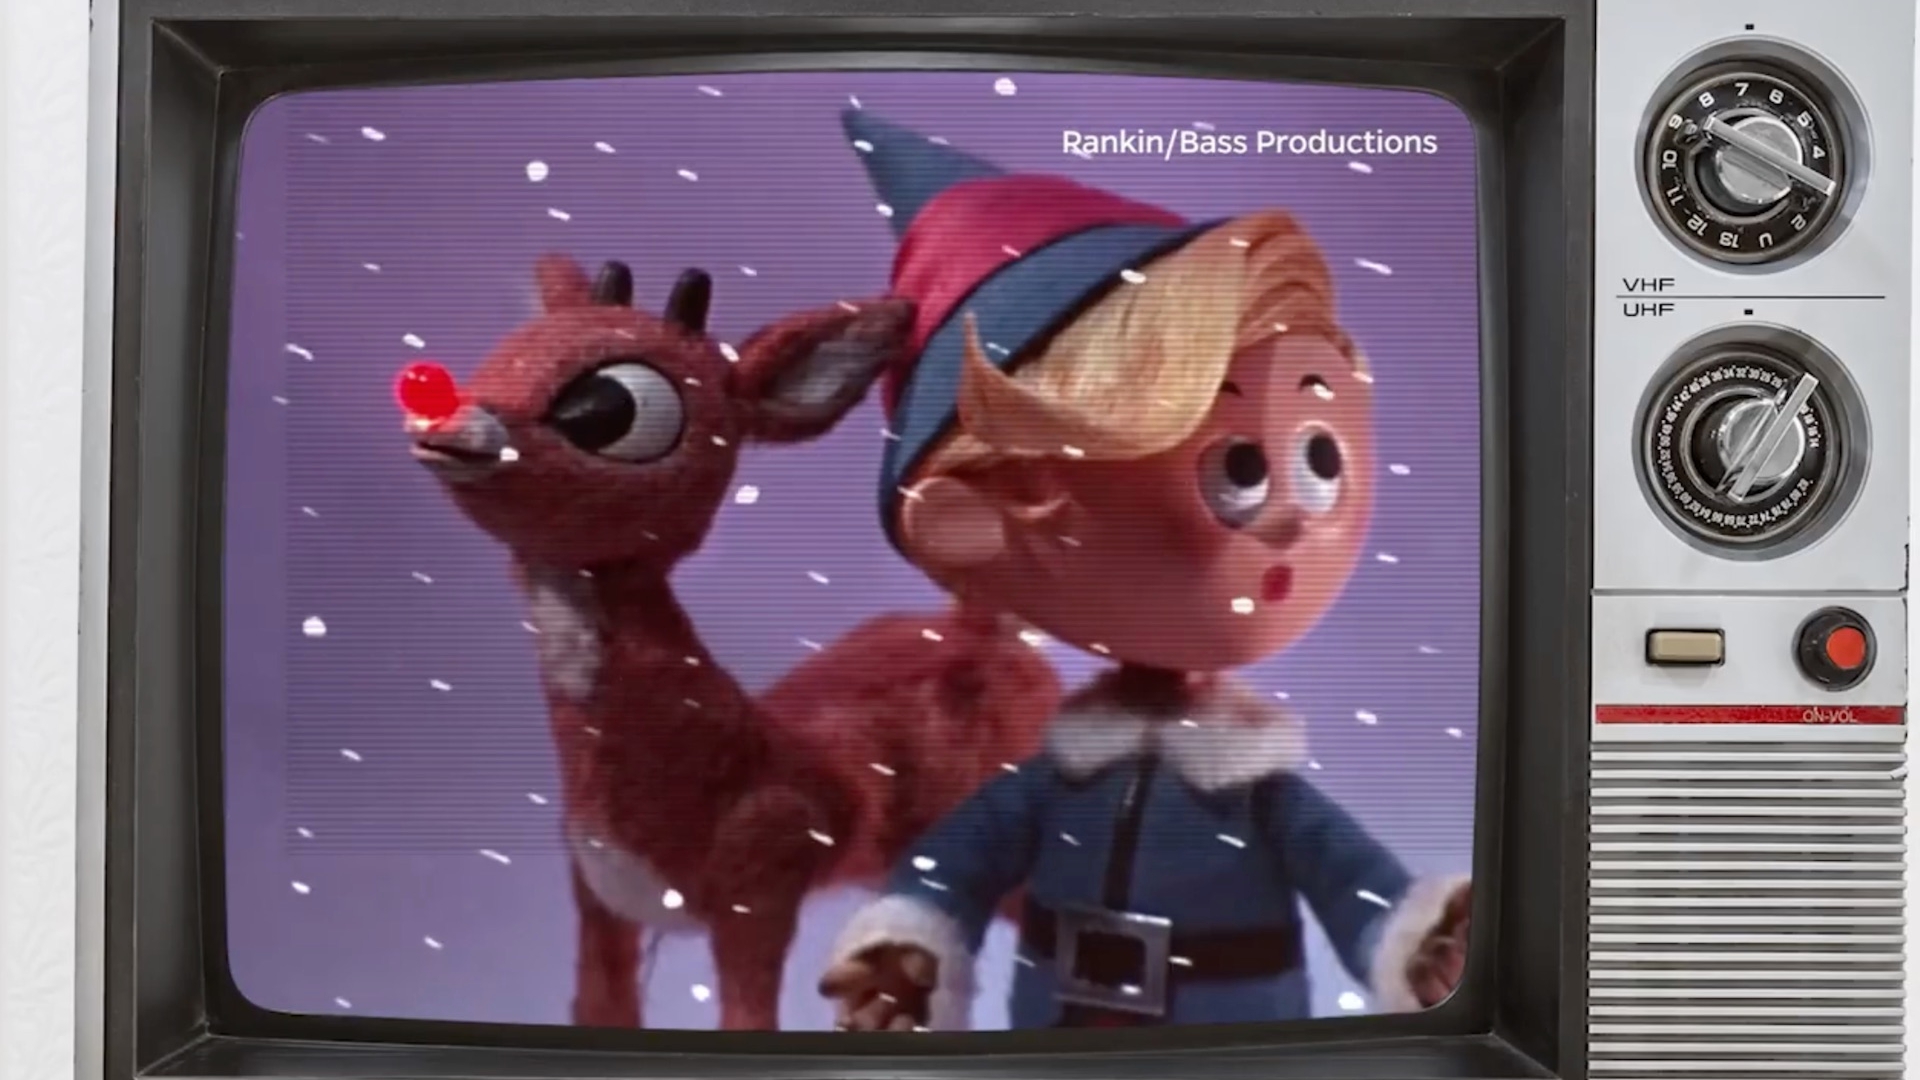 You tube rudolph the red nosed reindeer song